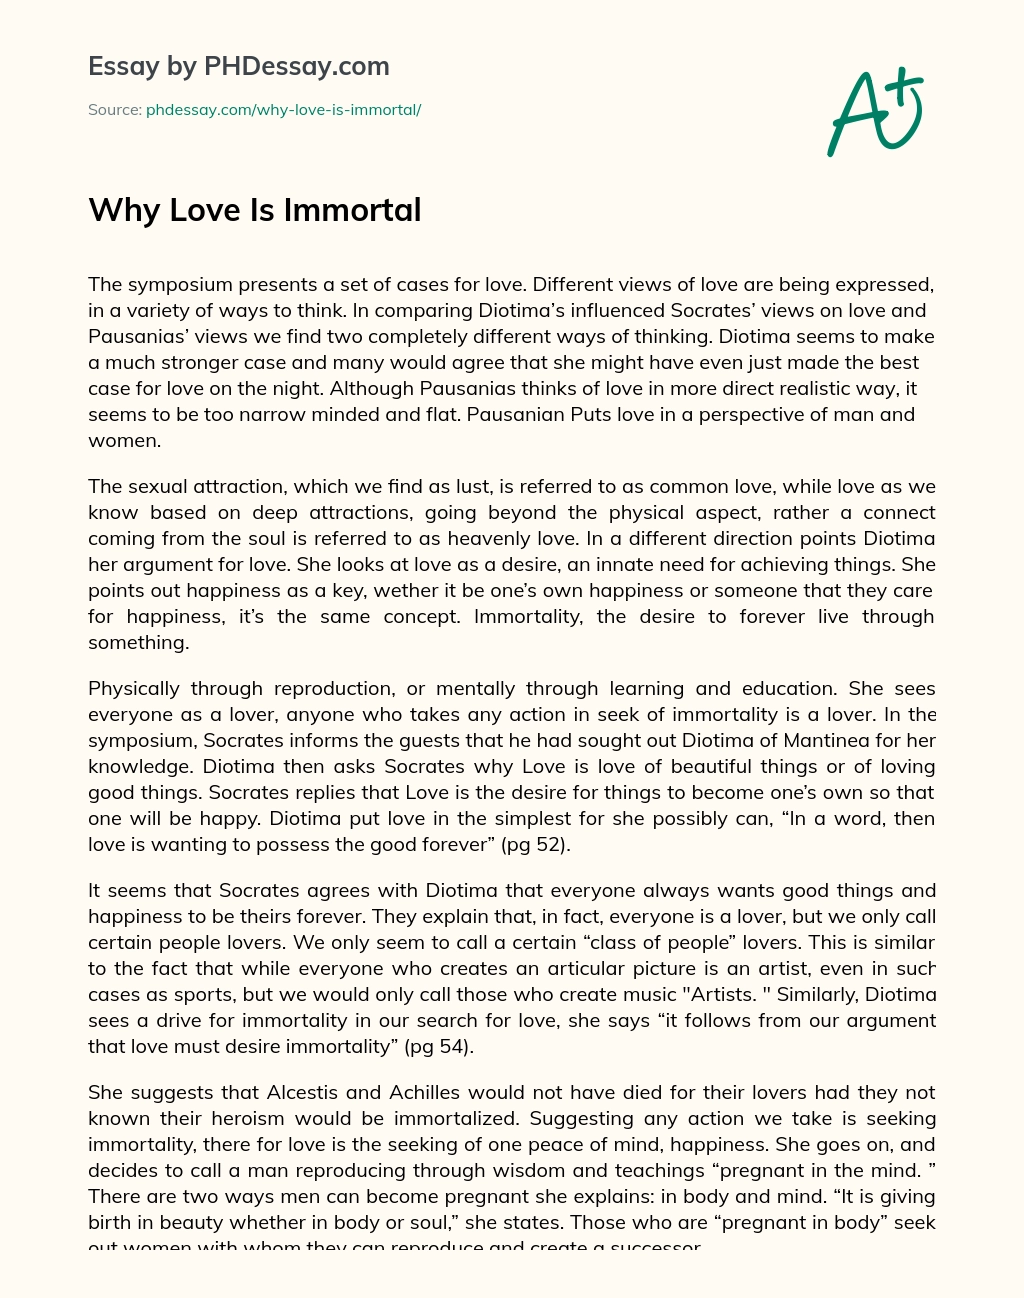 Why Love Is Immortal essay